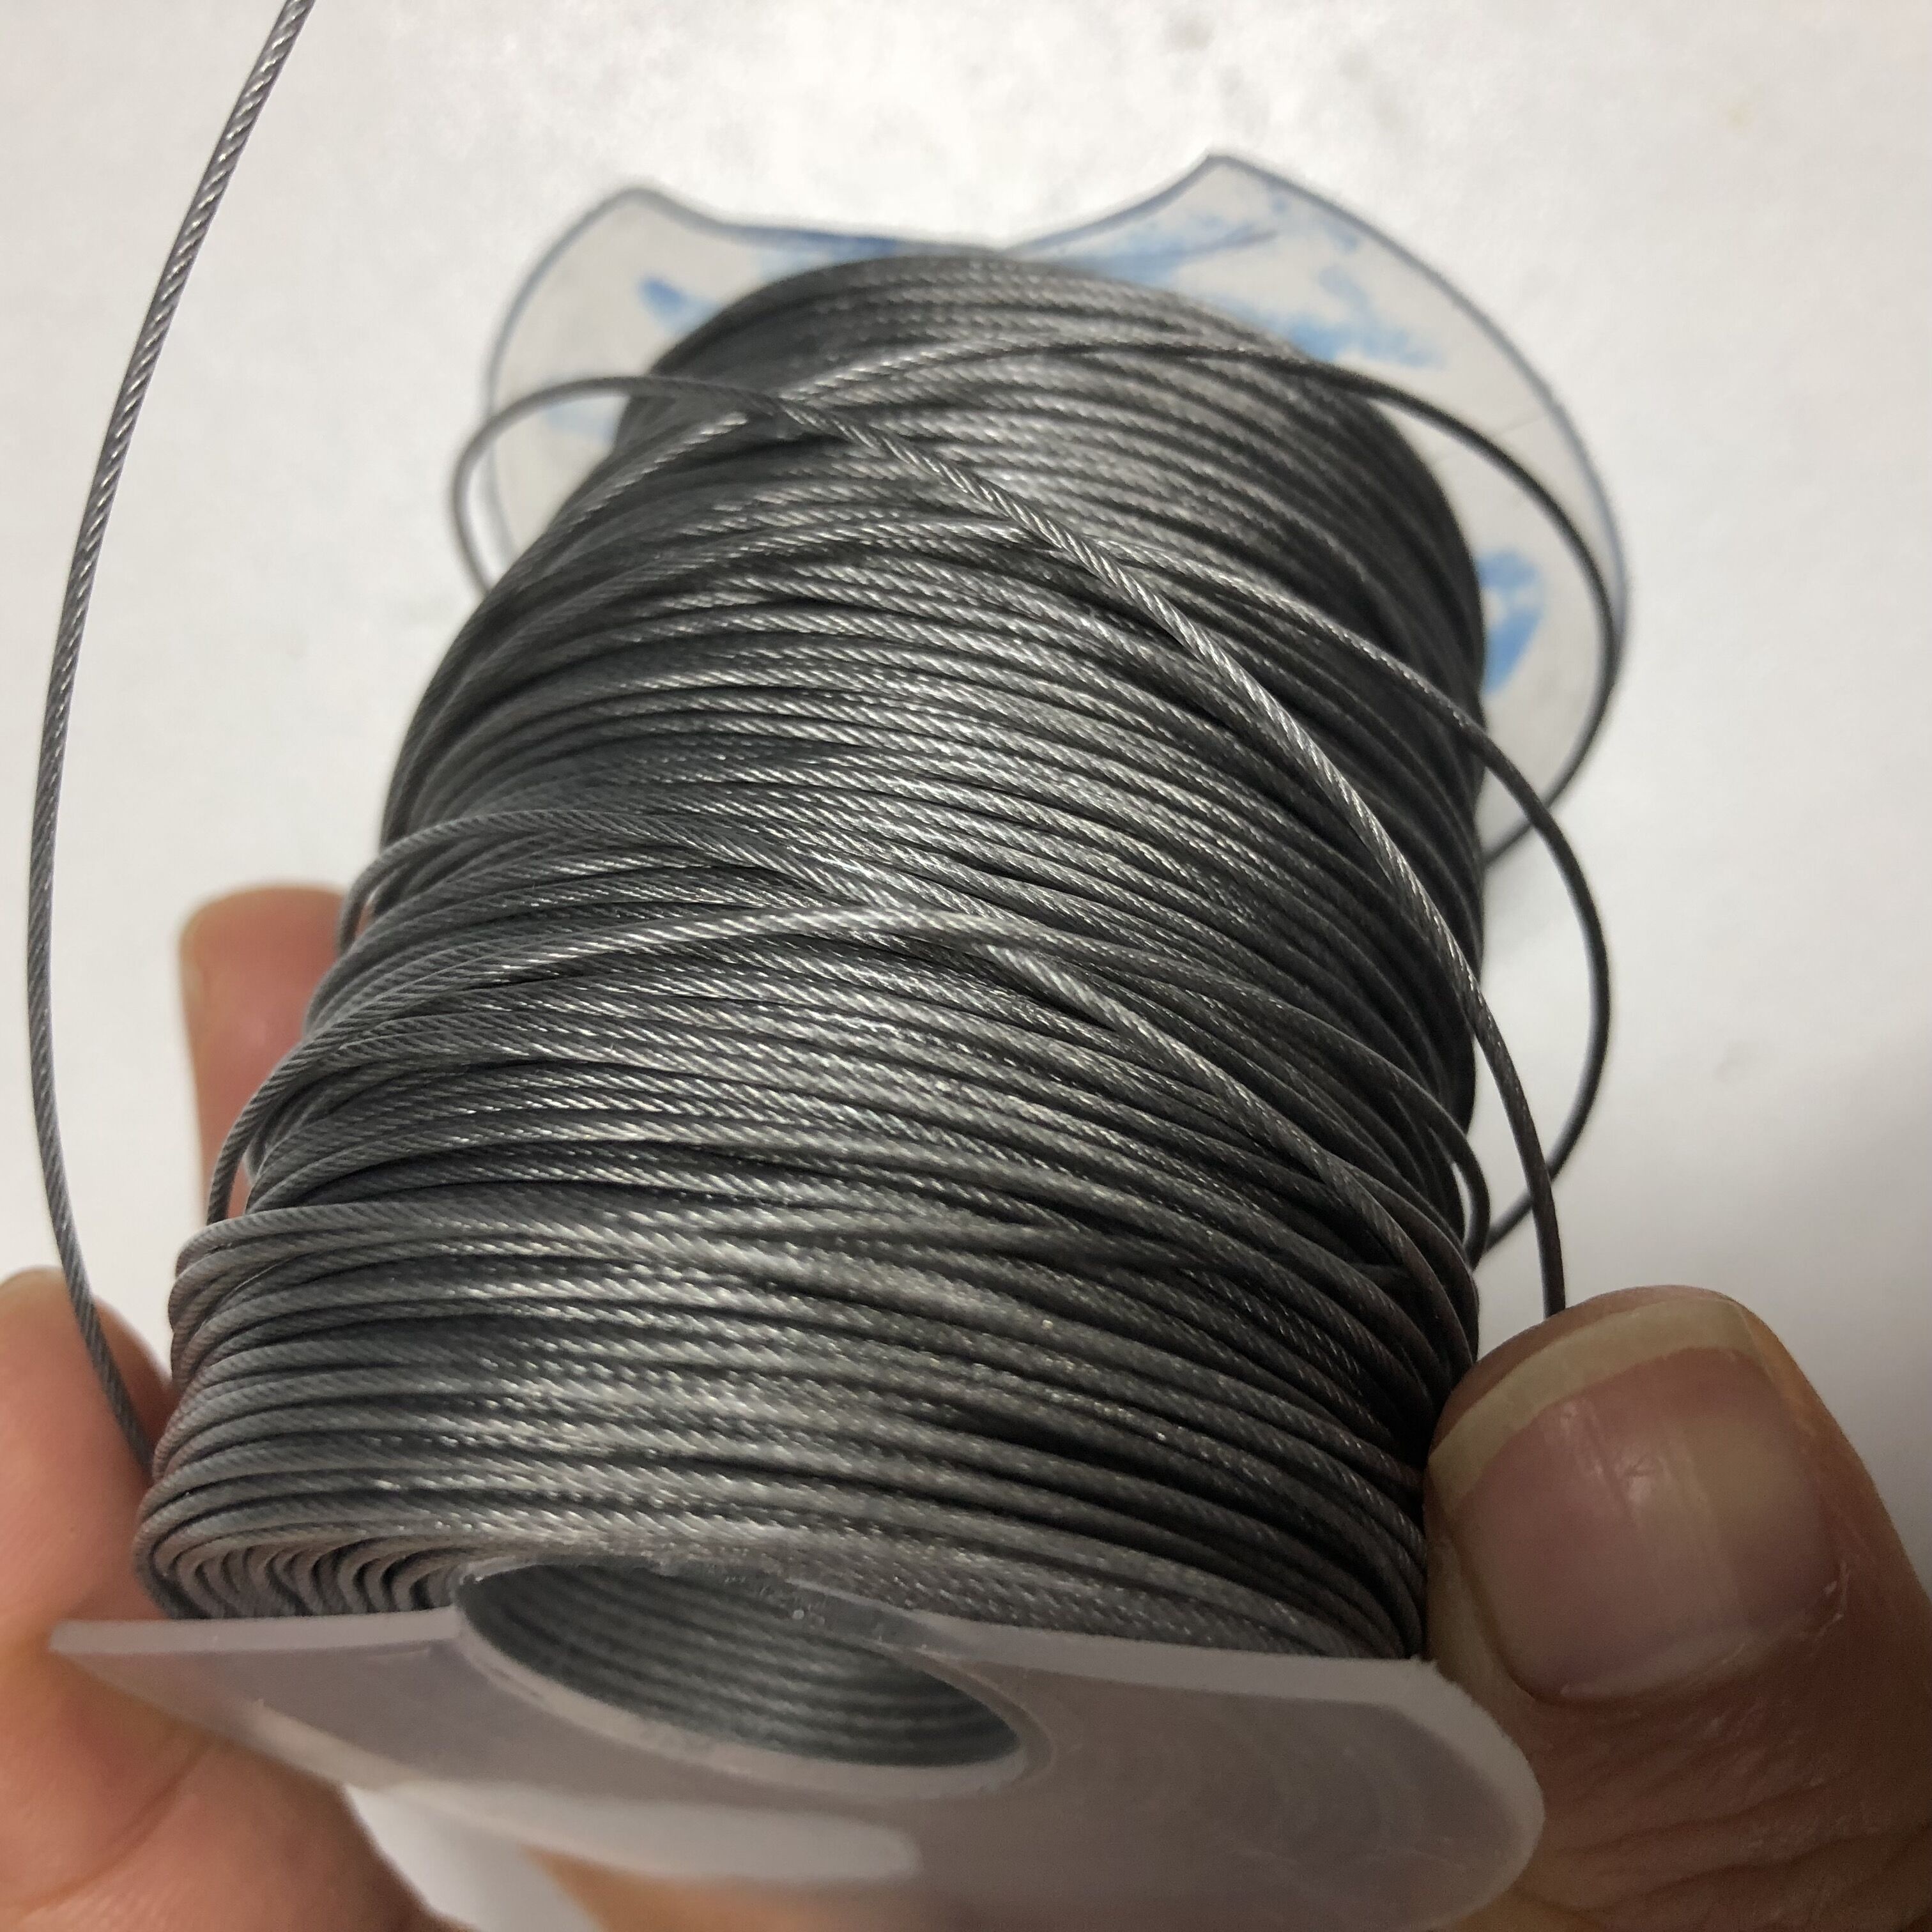 soft wire rope with coating in 0.8mm diameter for ssm machine